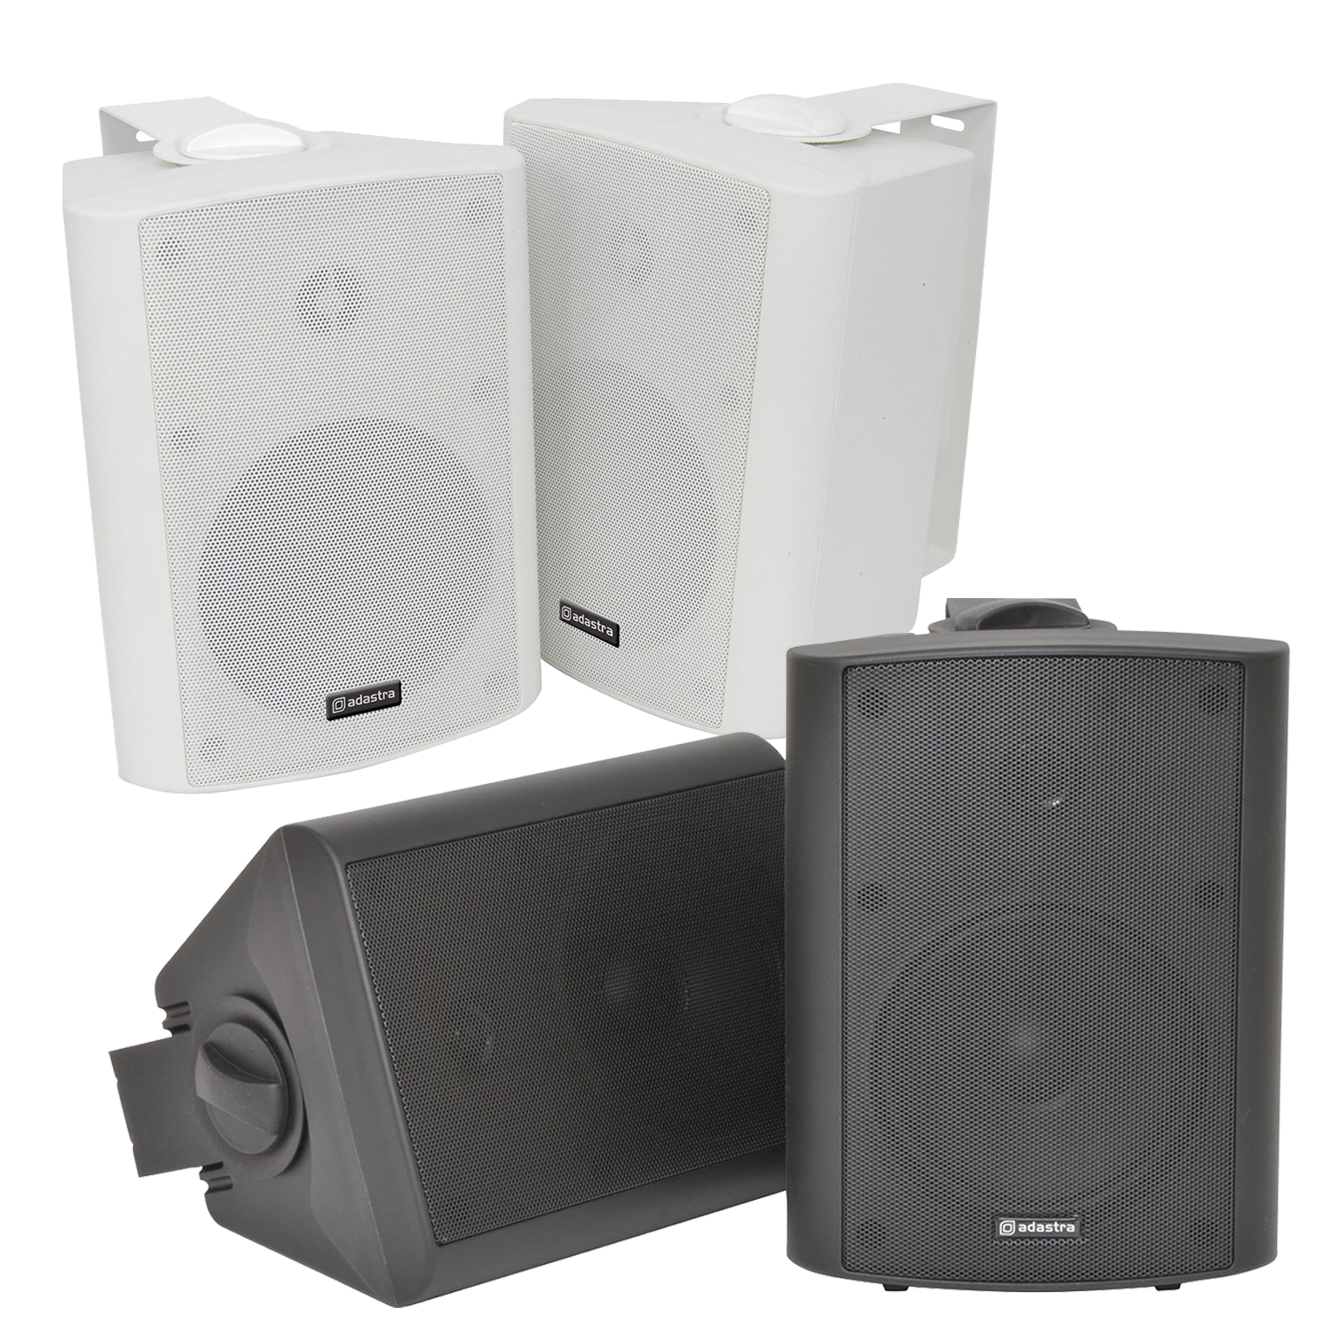 Adastra BC5 series 45w 8 ohm black wall cabinet speakers